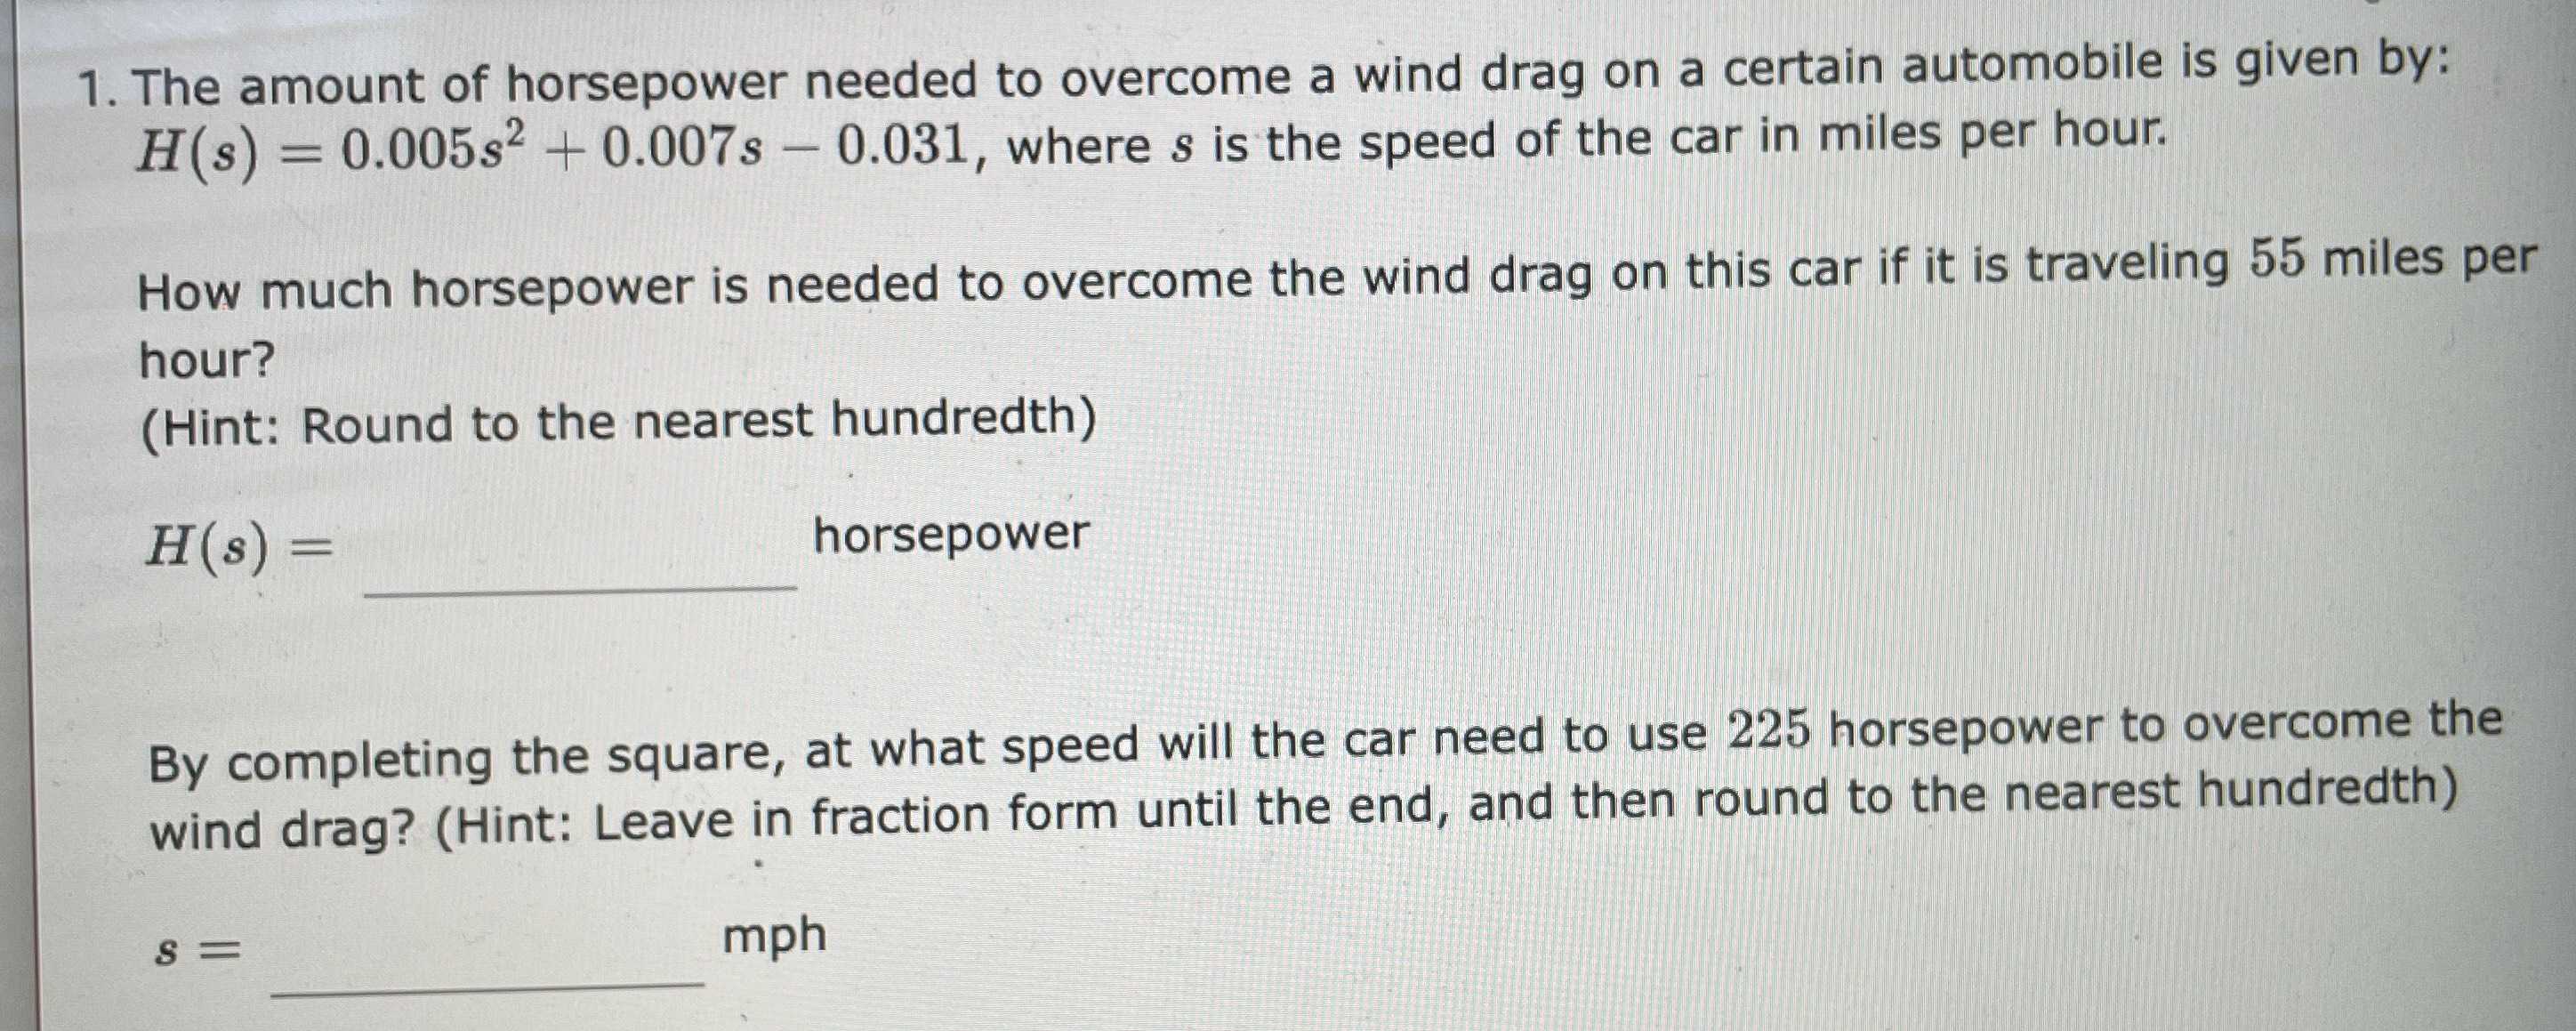 1. The amount of horsepower needed to overcome a w...